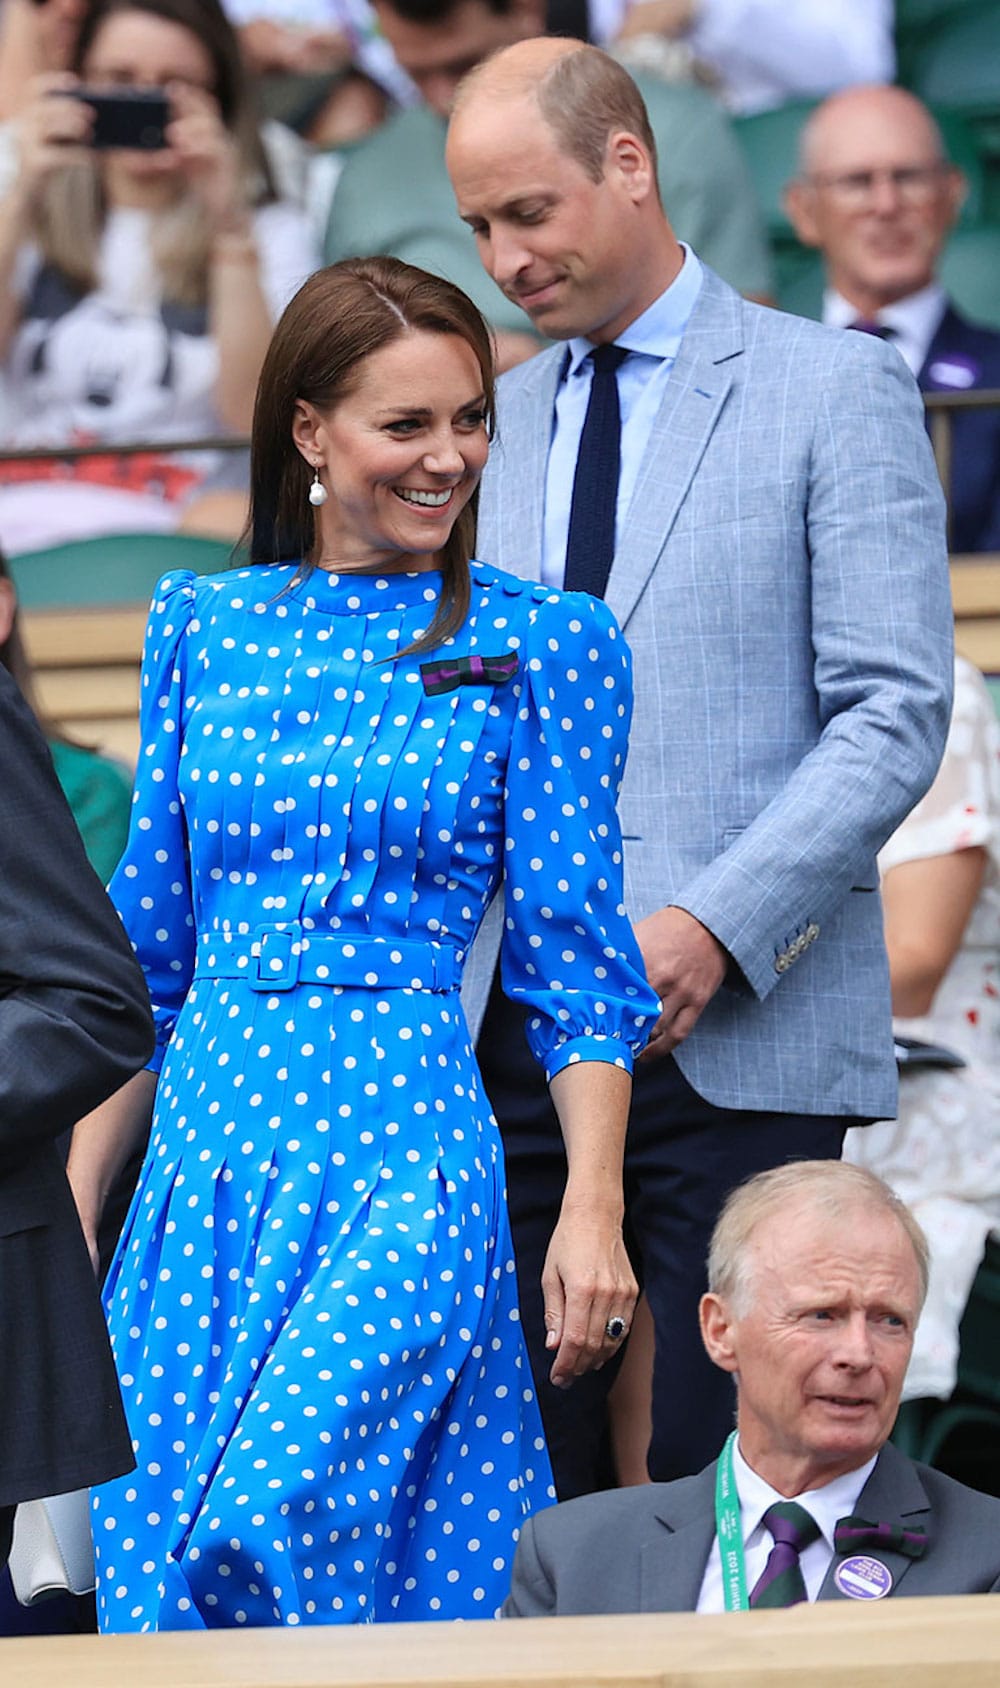 Kate Middleton, the Duchess of Cambridge and Prince William, the Duke of Cambridge at the 2022 Wimbledon Championships.